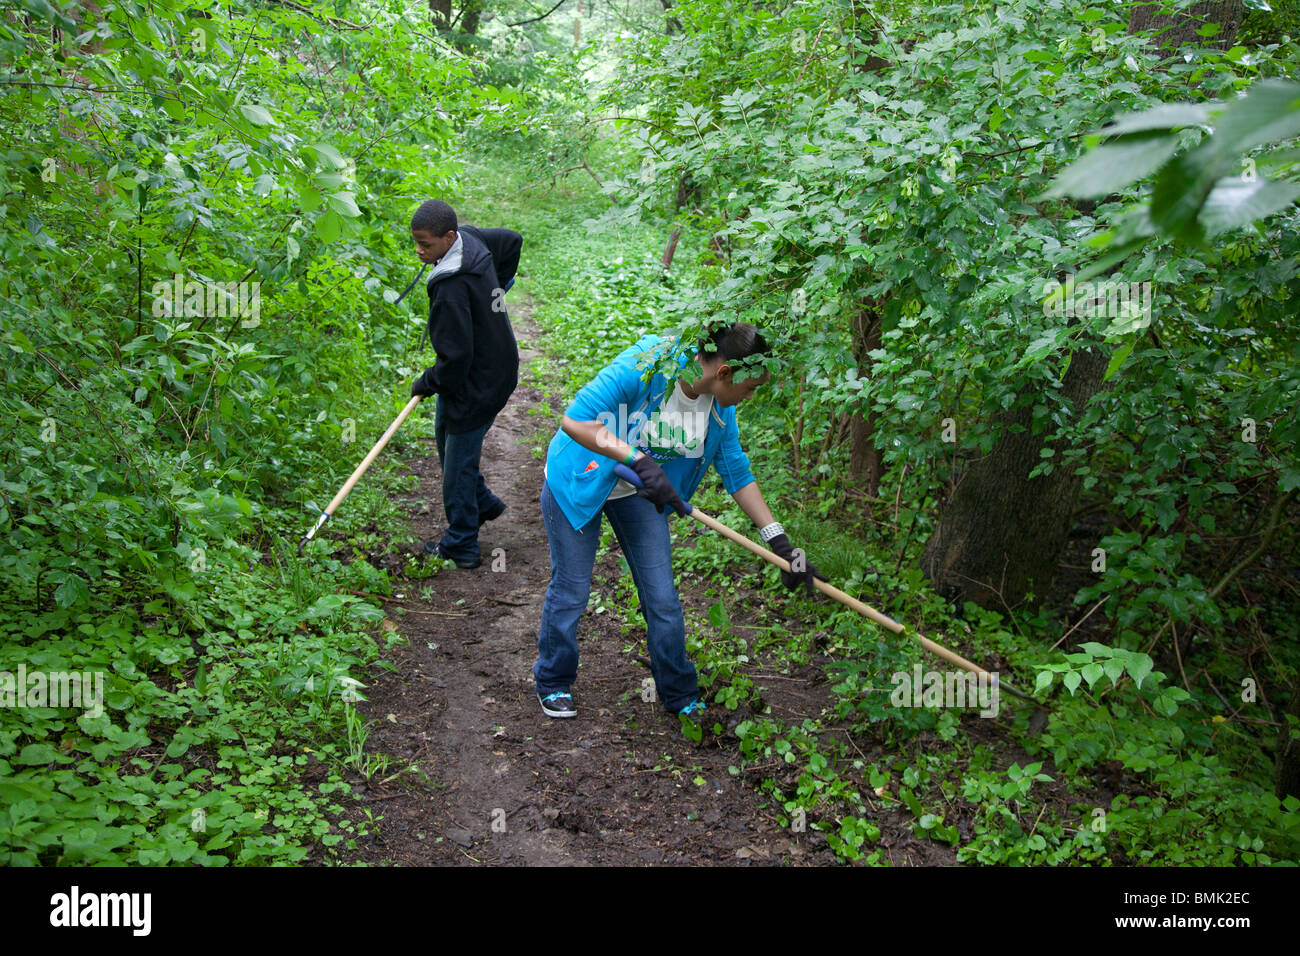 Detroit, Michigan - Volunteers worked on a nature trail to remove invasive garlic mustard in Eliza Howell Park. Stock Photo